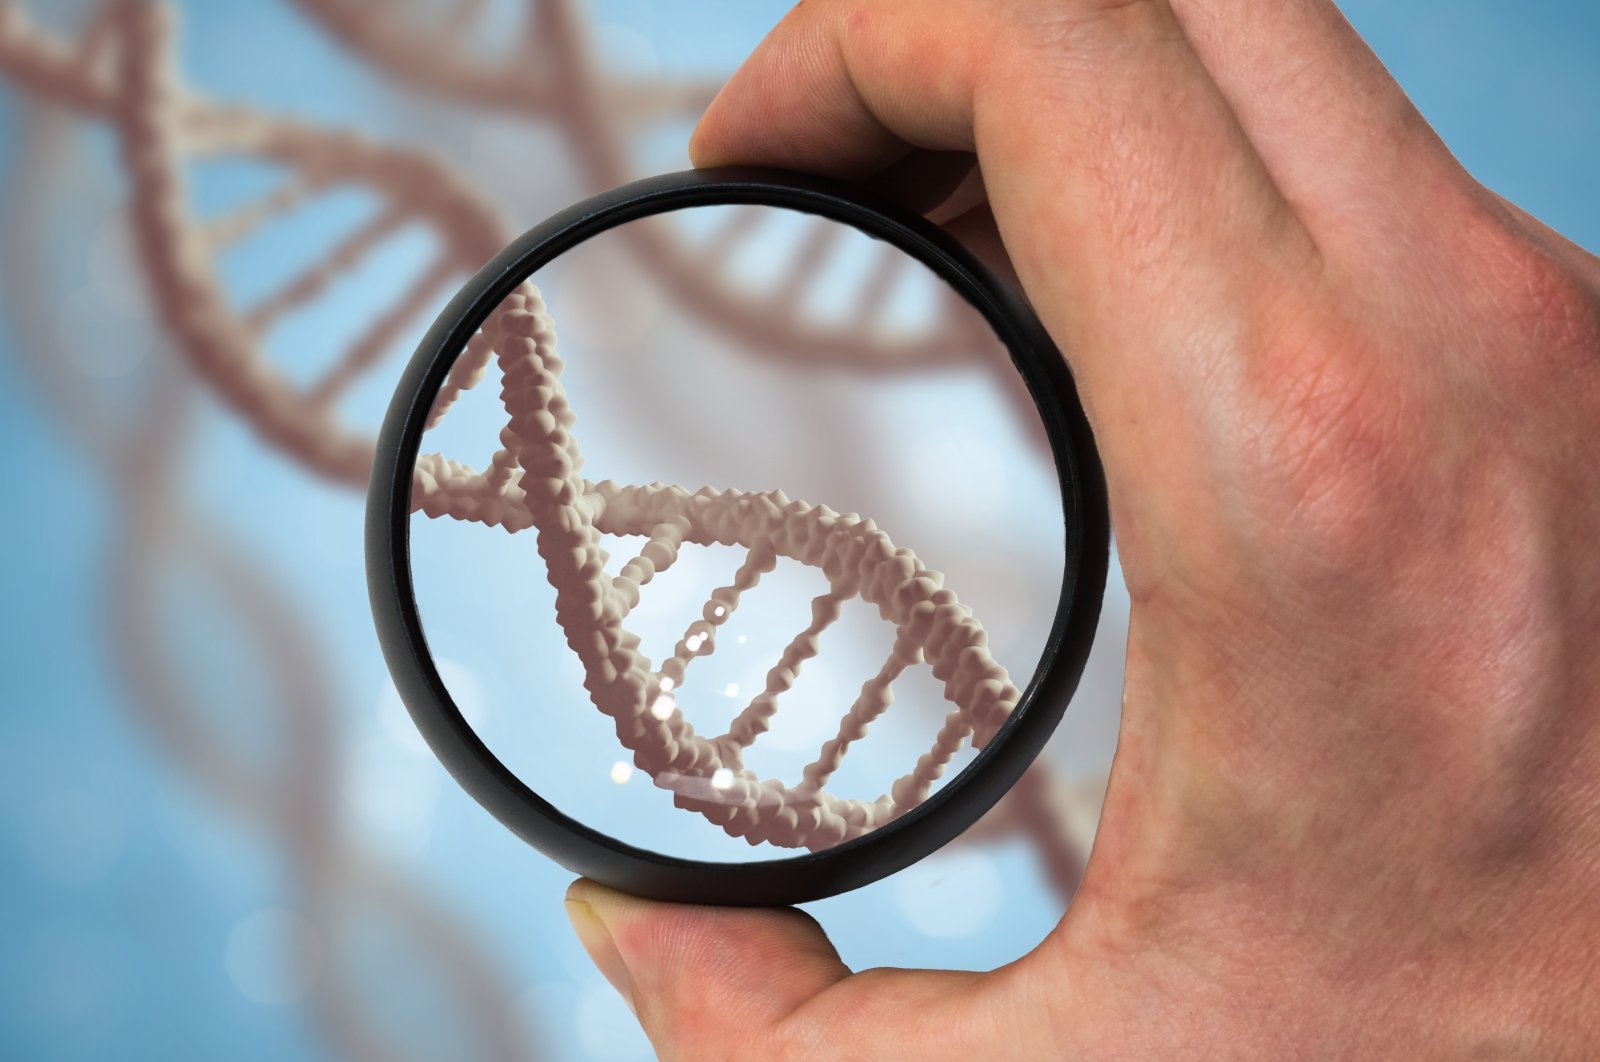 While the conventional wisdom that people are more likely to get sick as they get older holds true, researchers now say genes are less likely to impact health over time. (Shutterstock Photo)